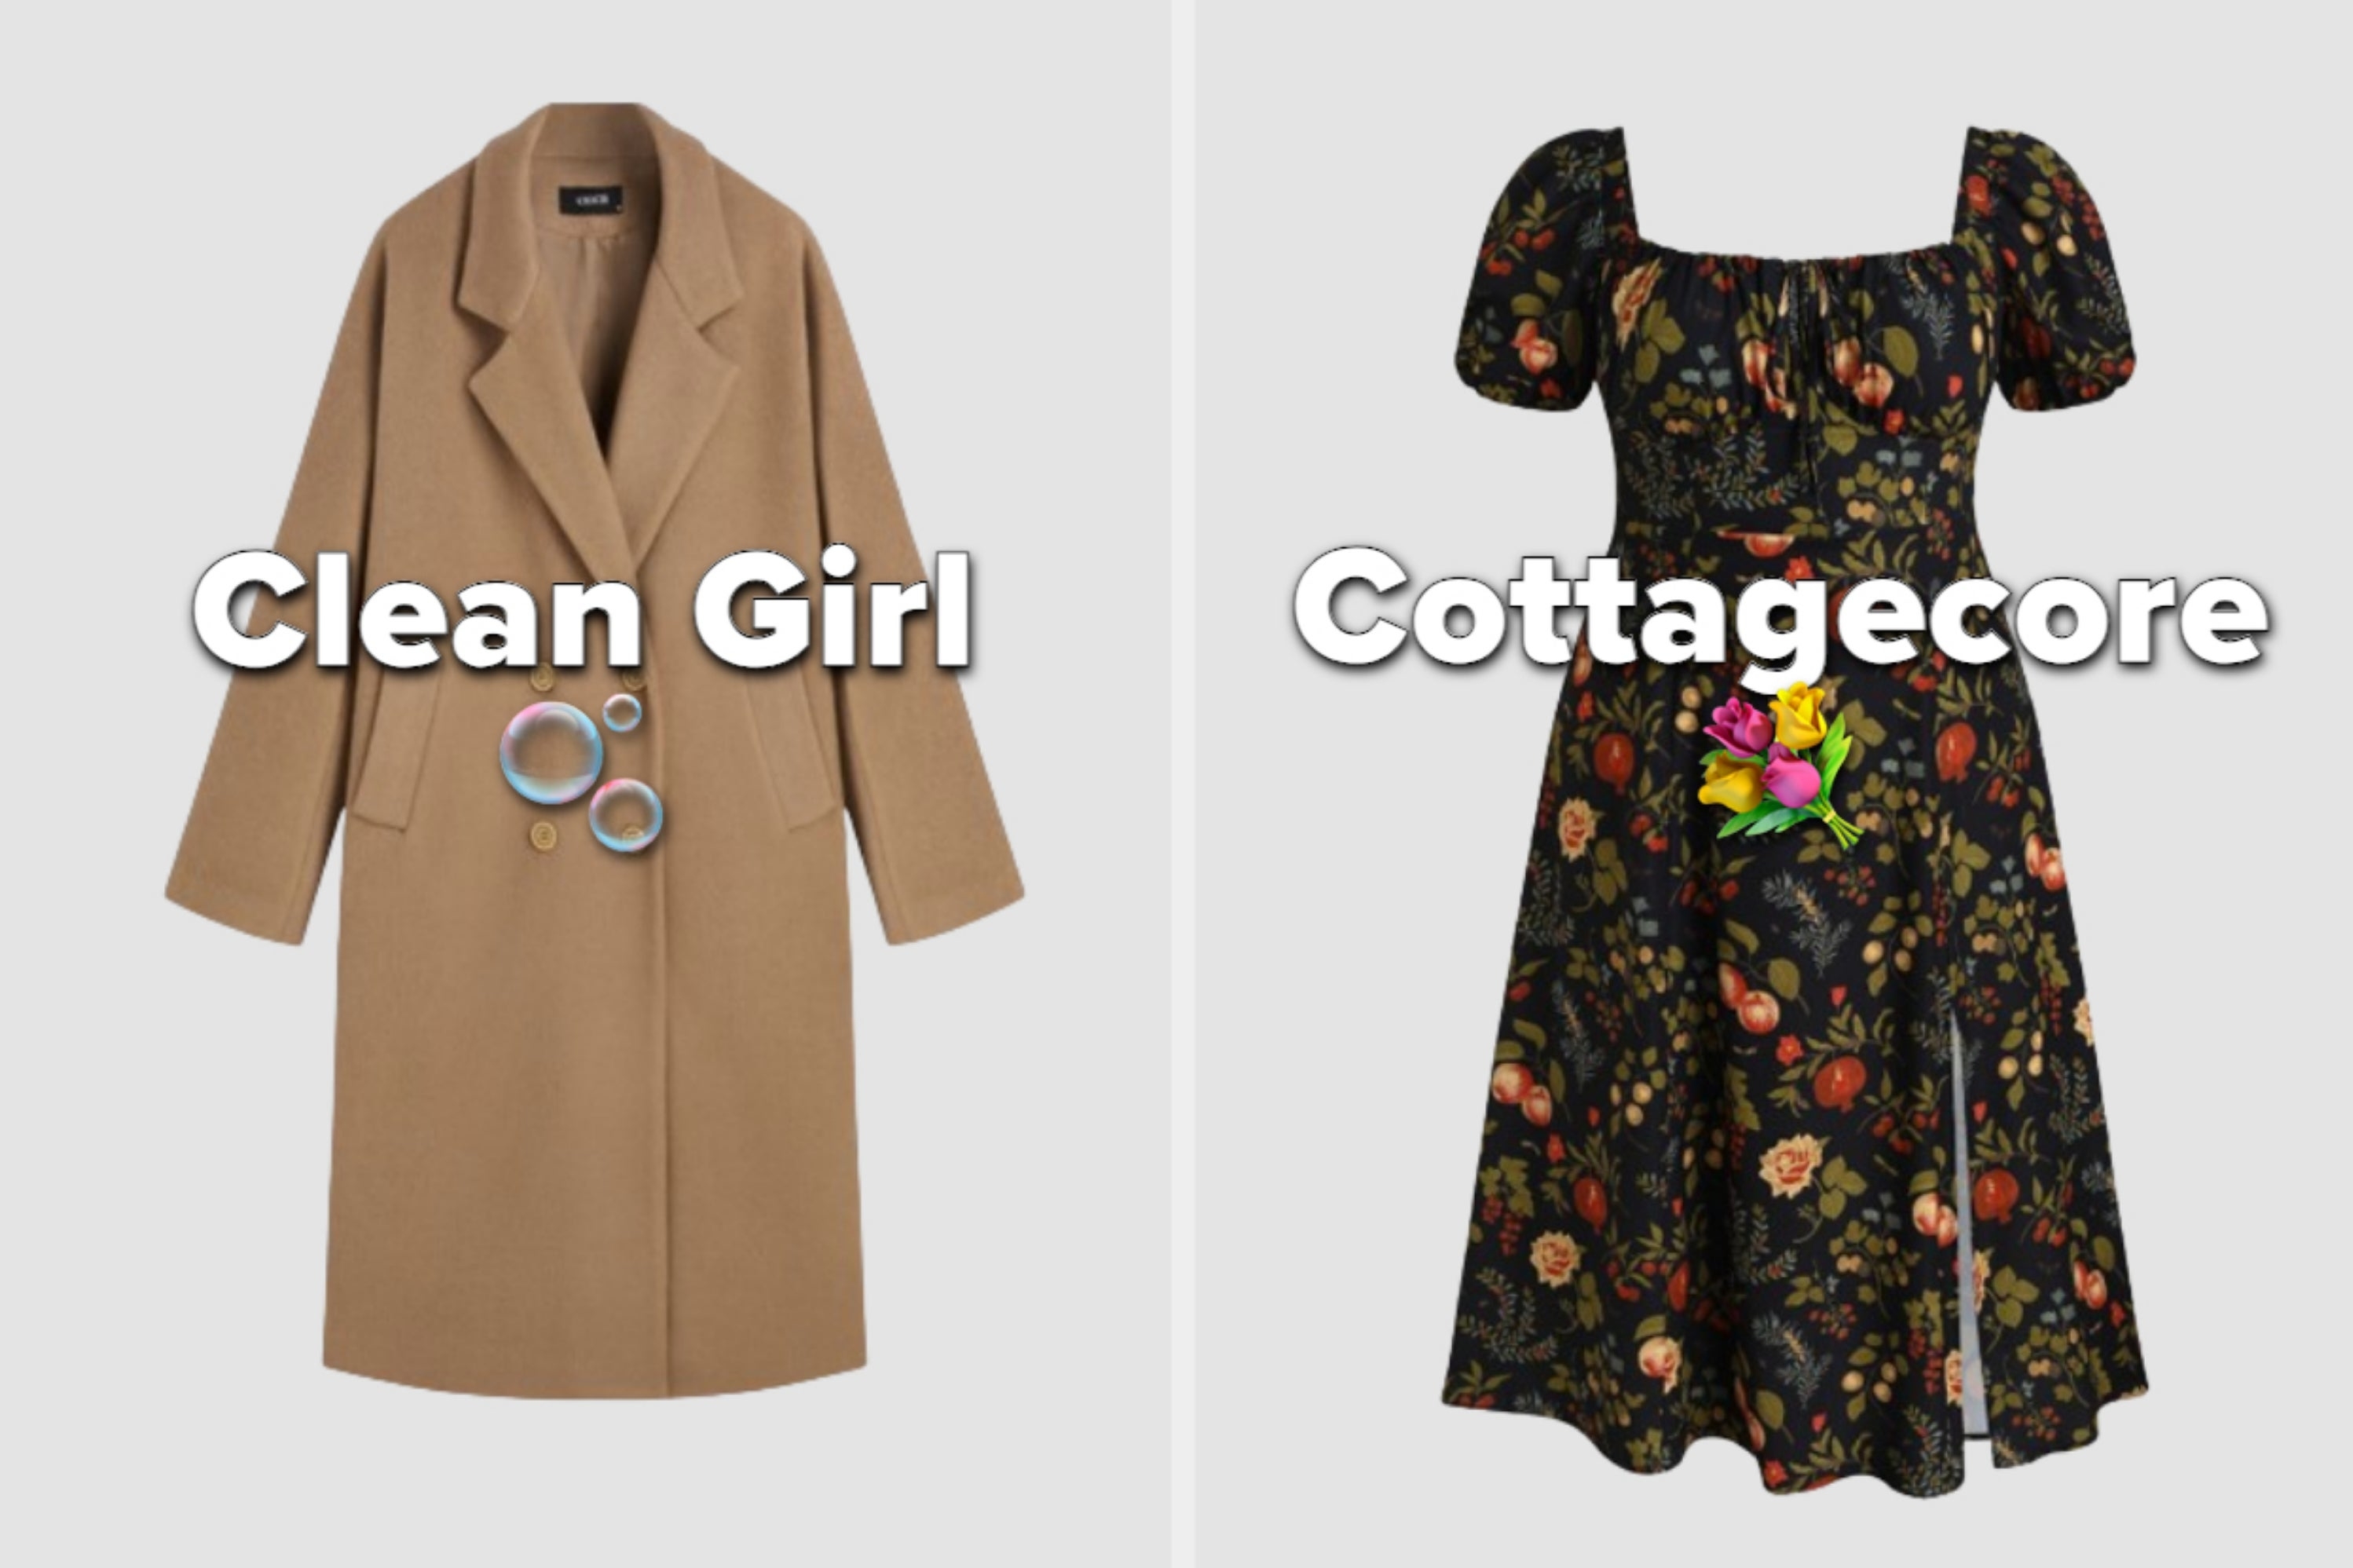 On the left, a camel coat labeled Clean Girl, and on the right, a floral dress labeled Cottagecore